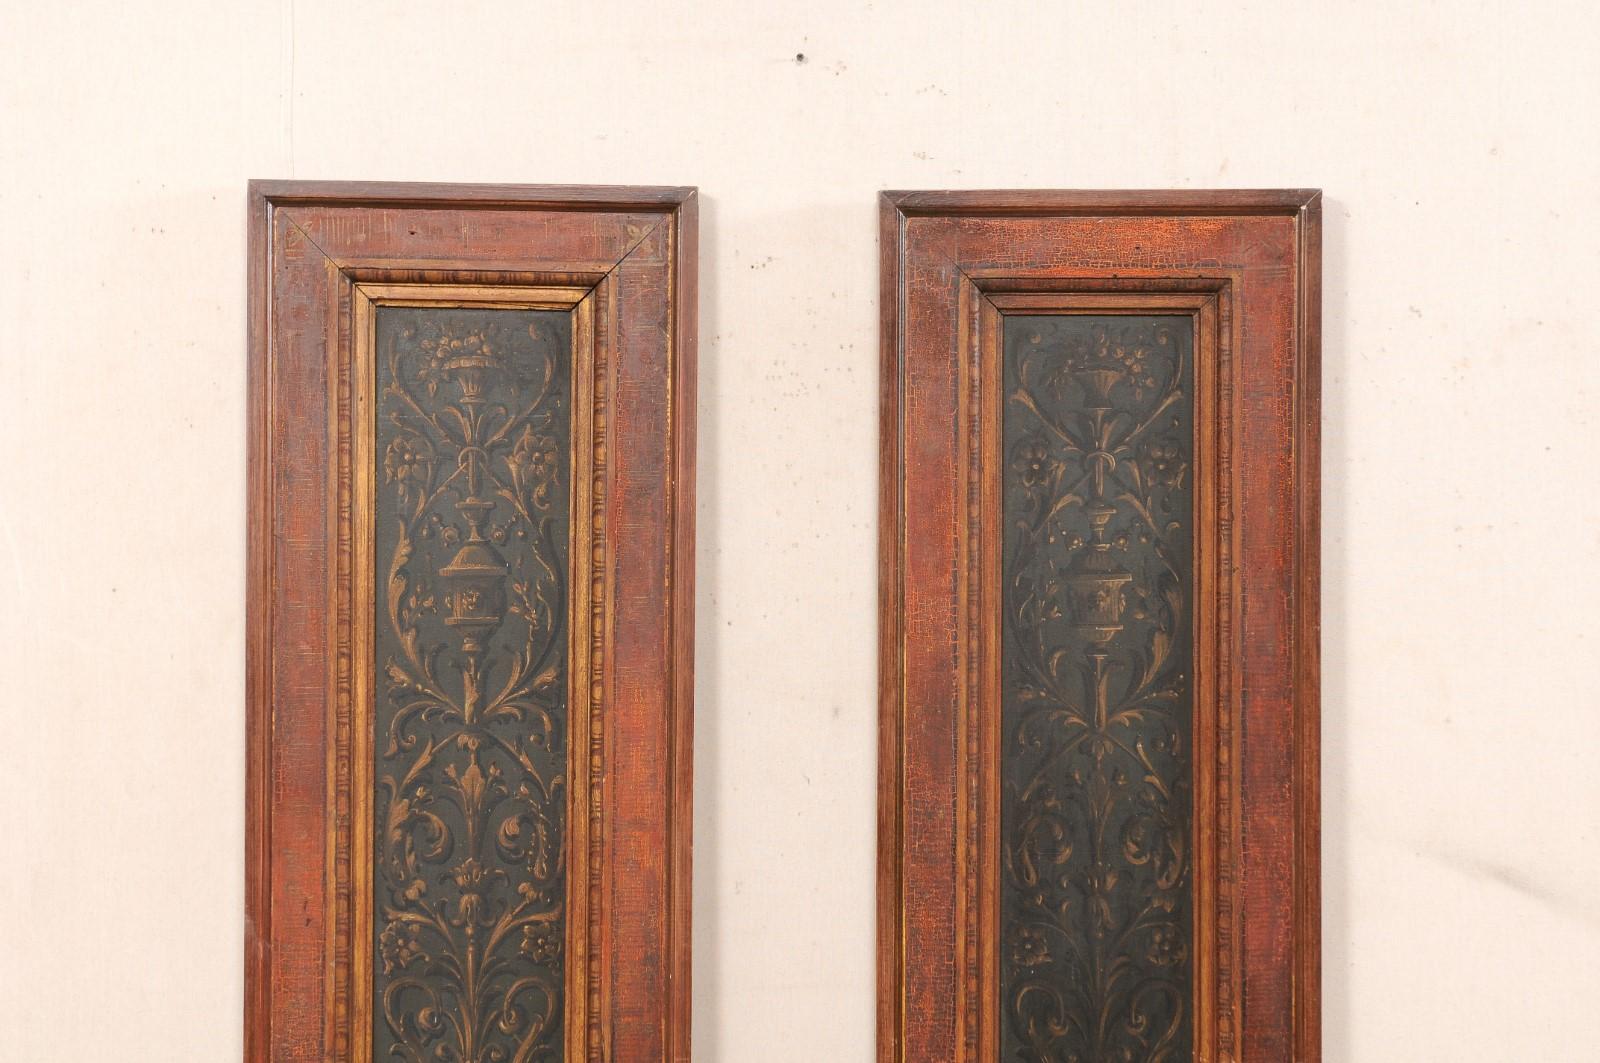 19th Century French Pair of Decoratively Hand-Painted Wooden Wall Panels In Good Condition For Sale In Atlanta, GA